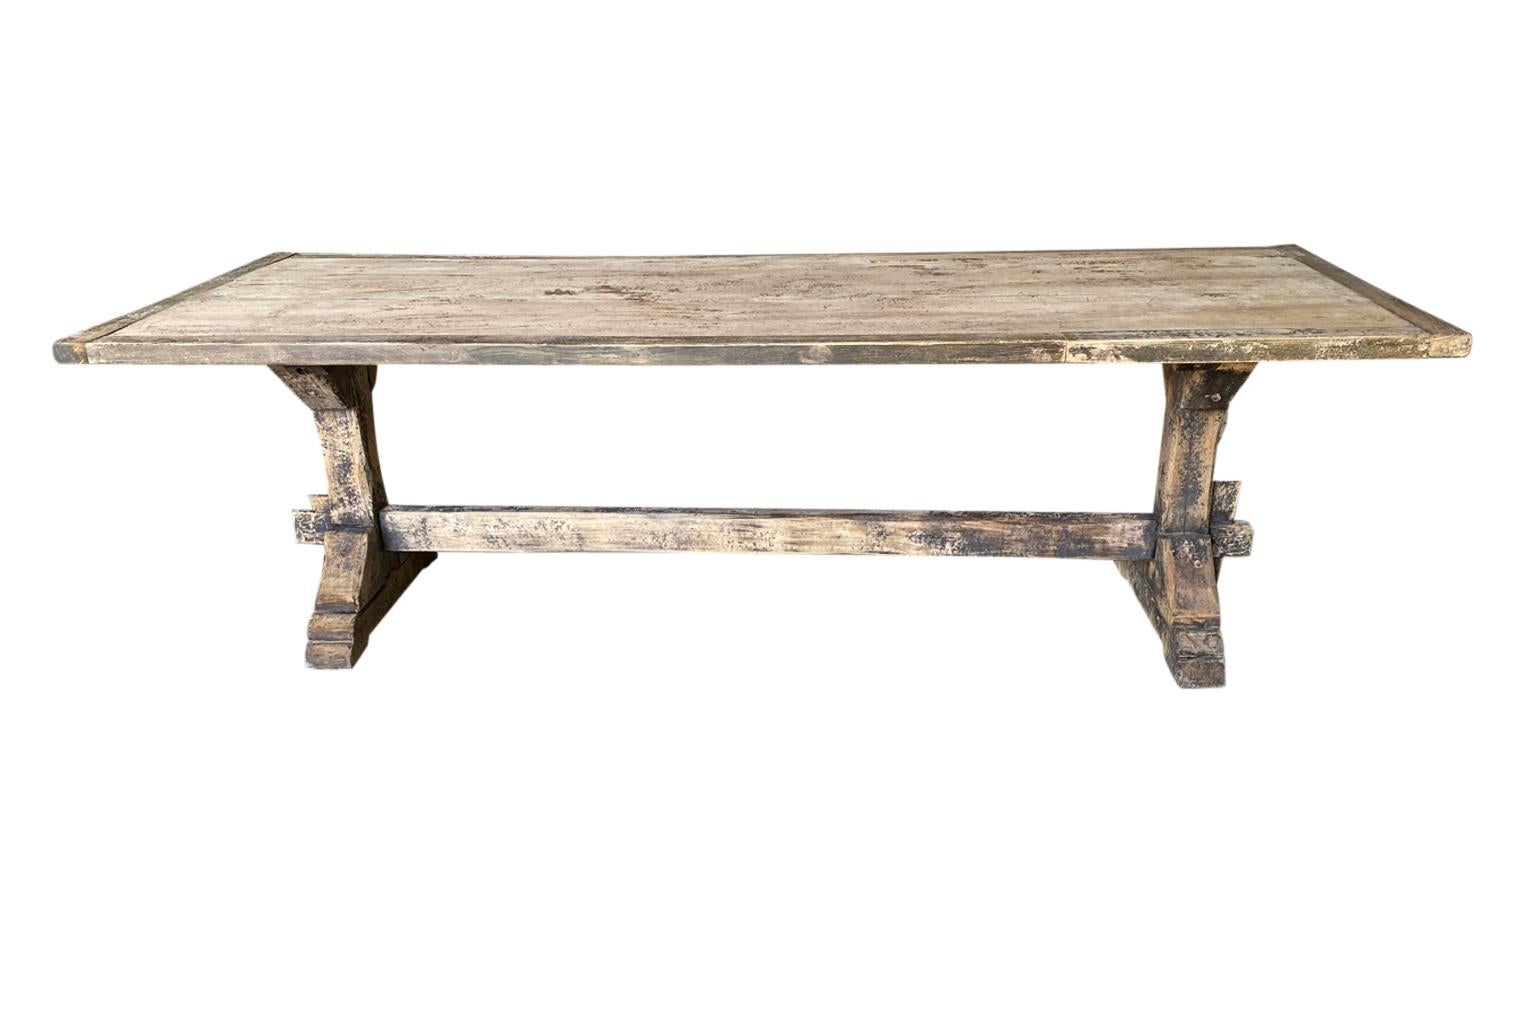 French 19th Century Primitive Farm Table - Trestle Table from the South of France.  Soundly constructed from painted and washed beech.  A charming table that will add warmth to its environment.